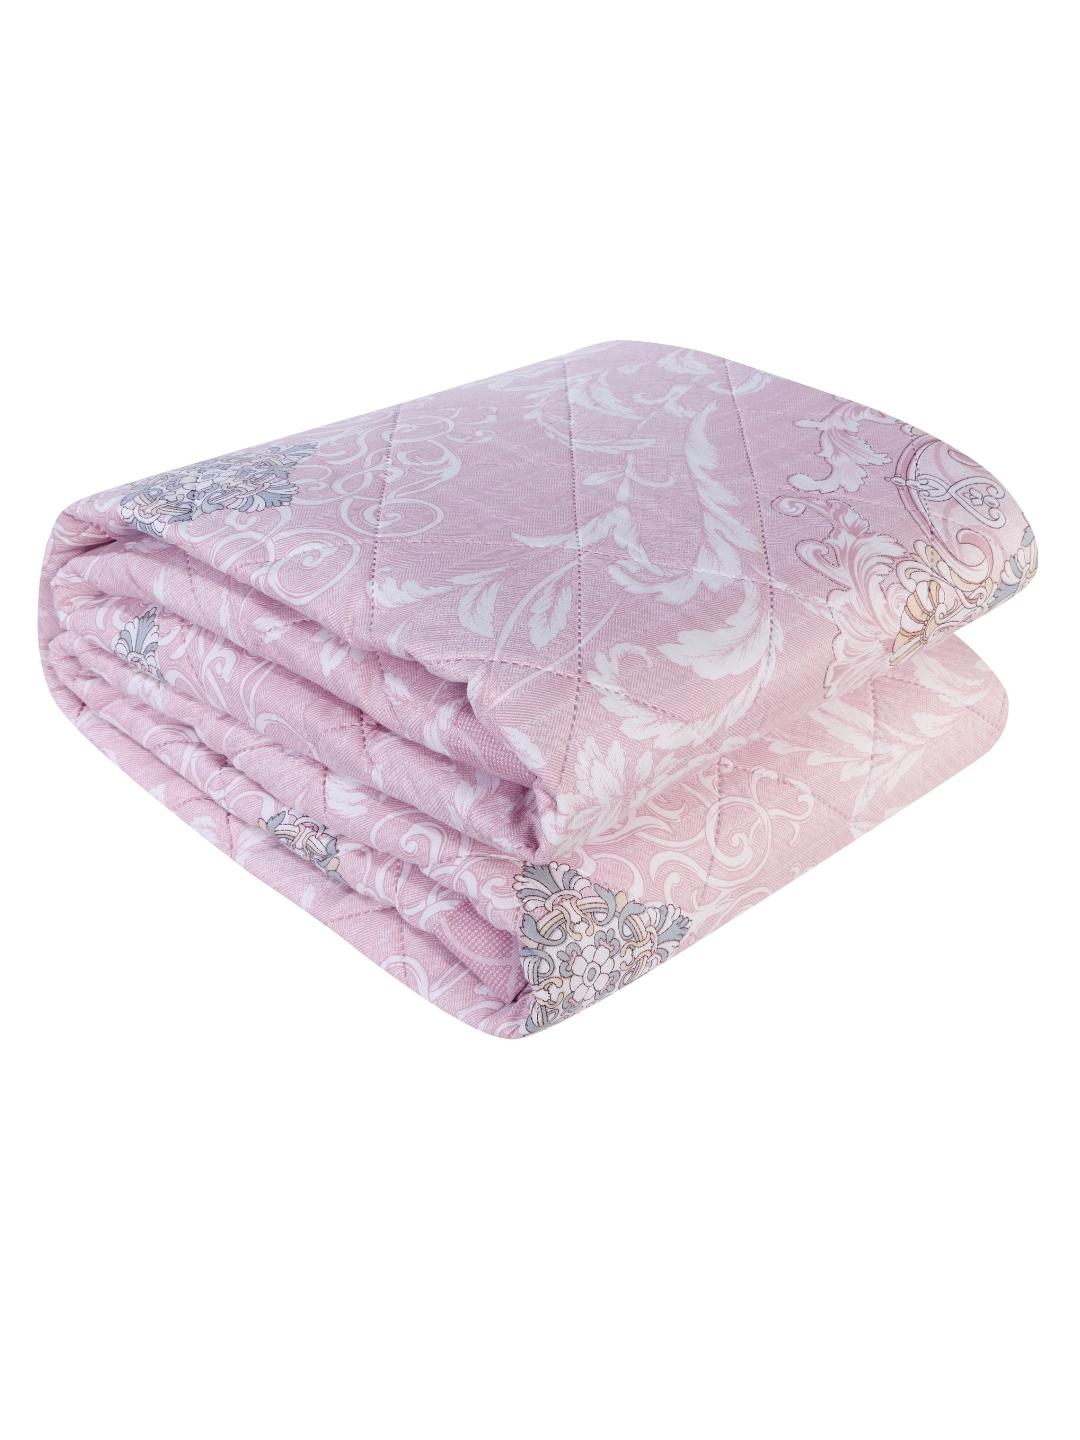 Floral Print Double Bed Light Weight Comforter- Baby Pink